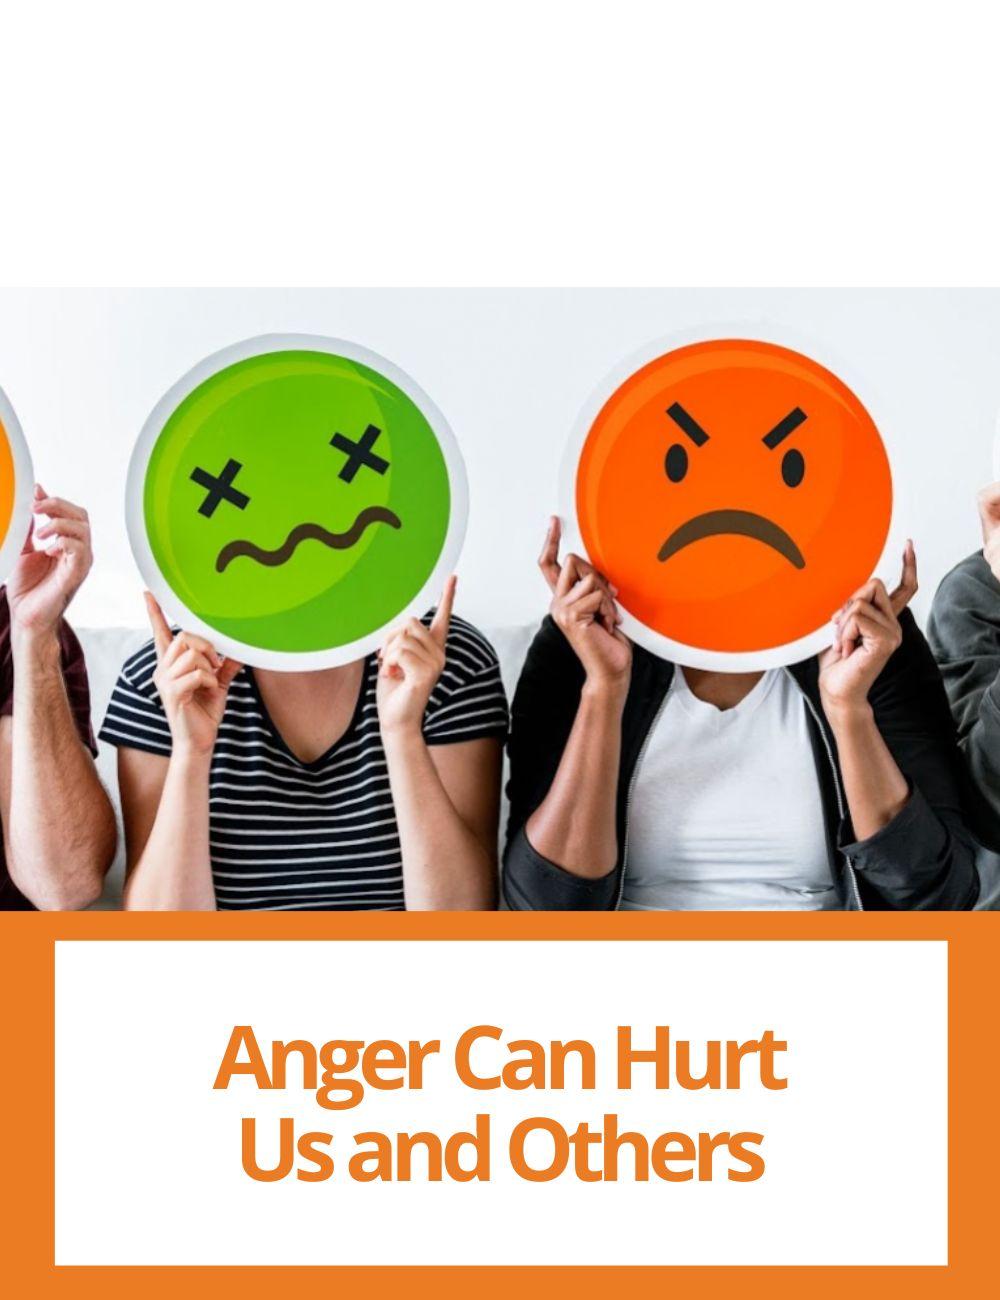 Link to related stories. Image: emoji with different expressions. Story headline: Anger Can Hurt Us and Others